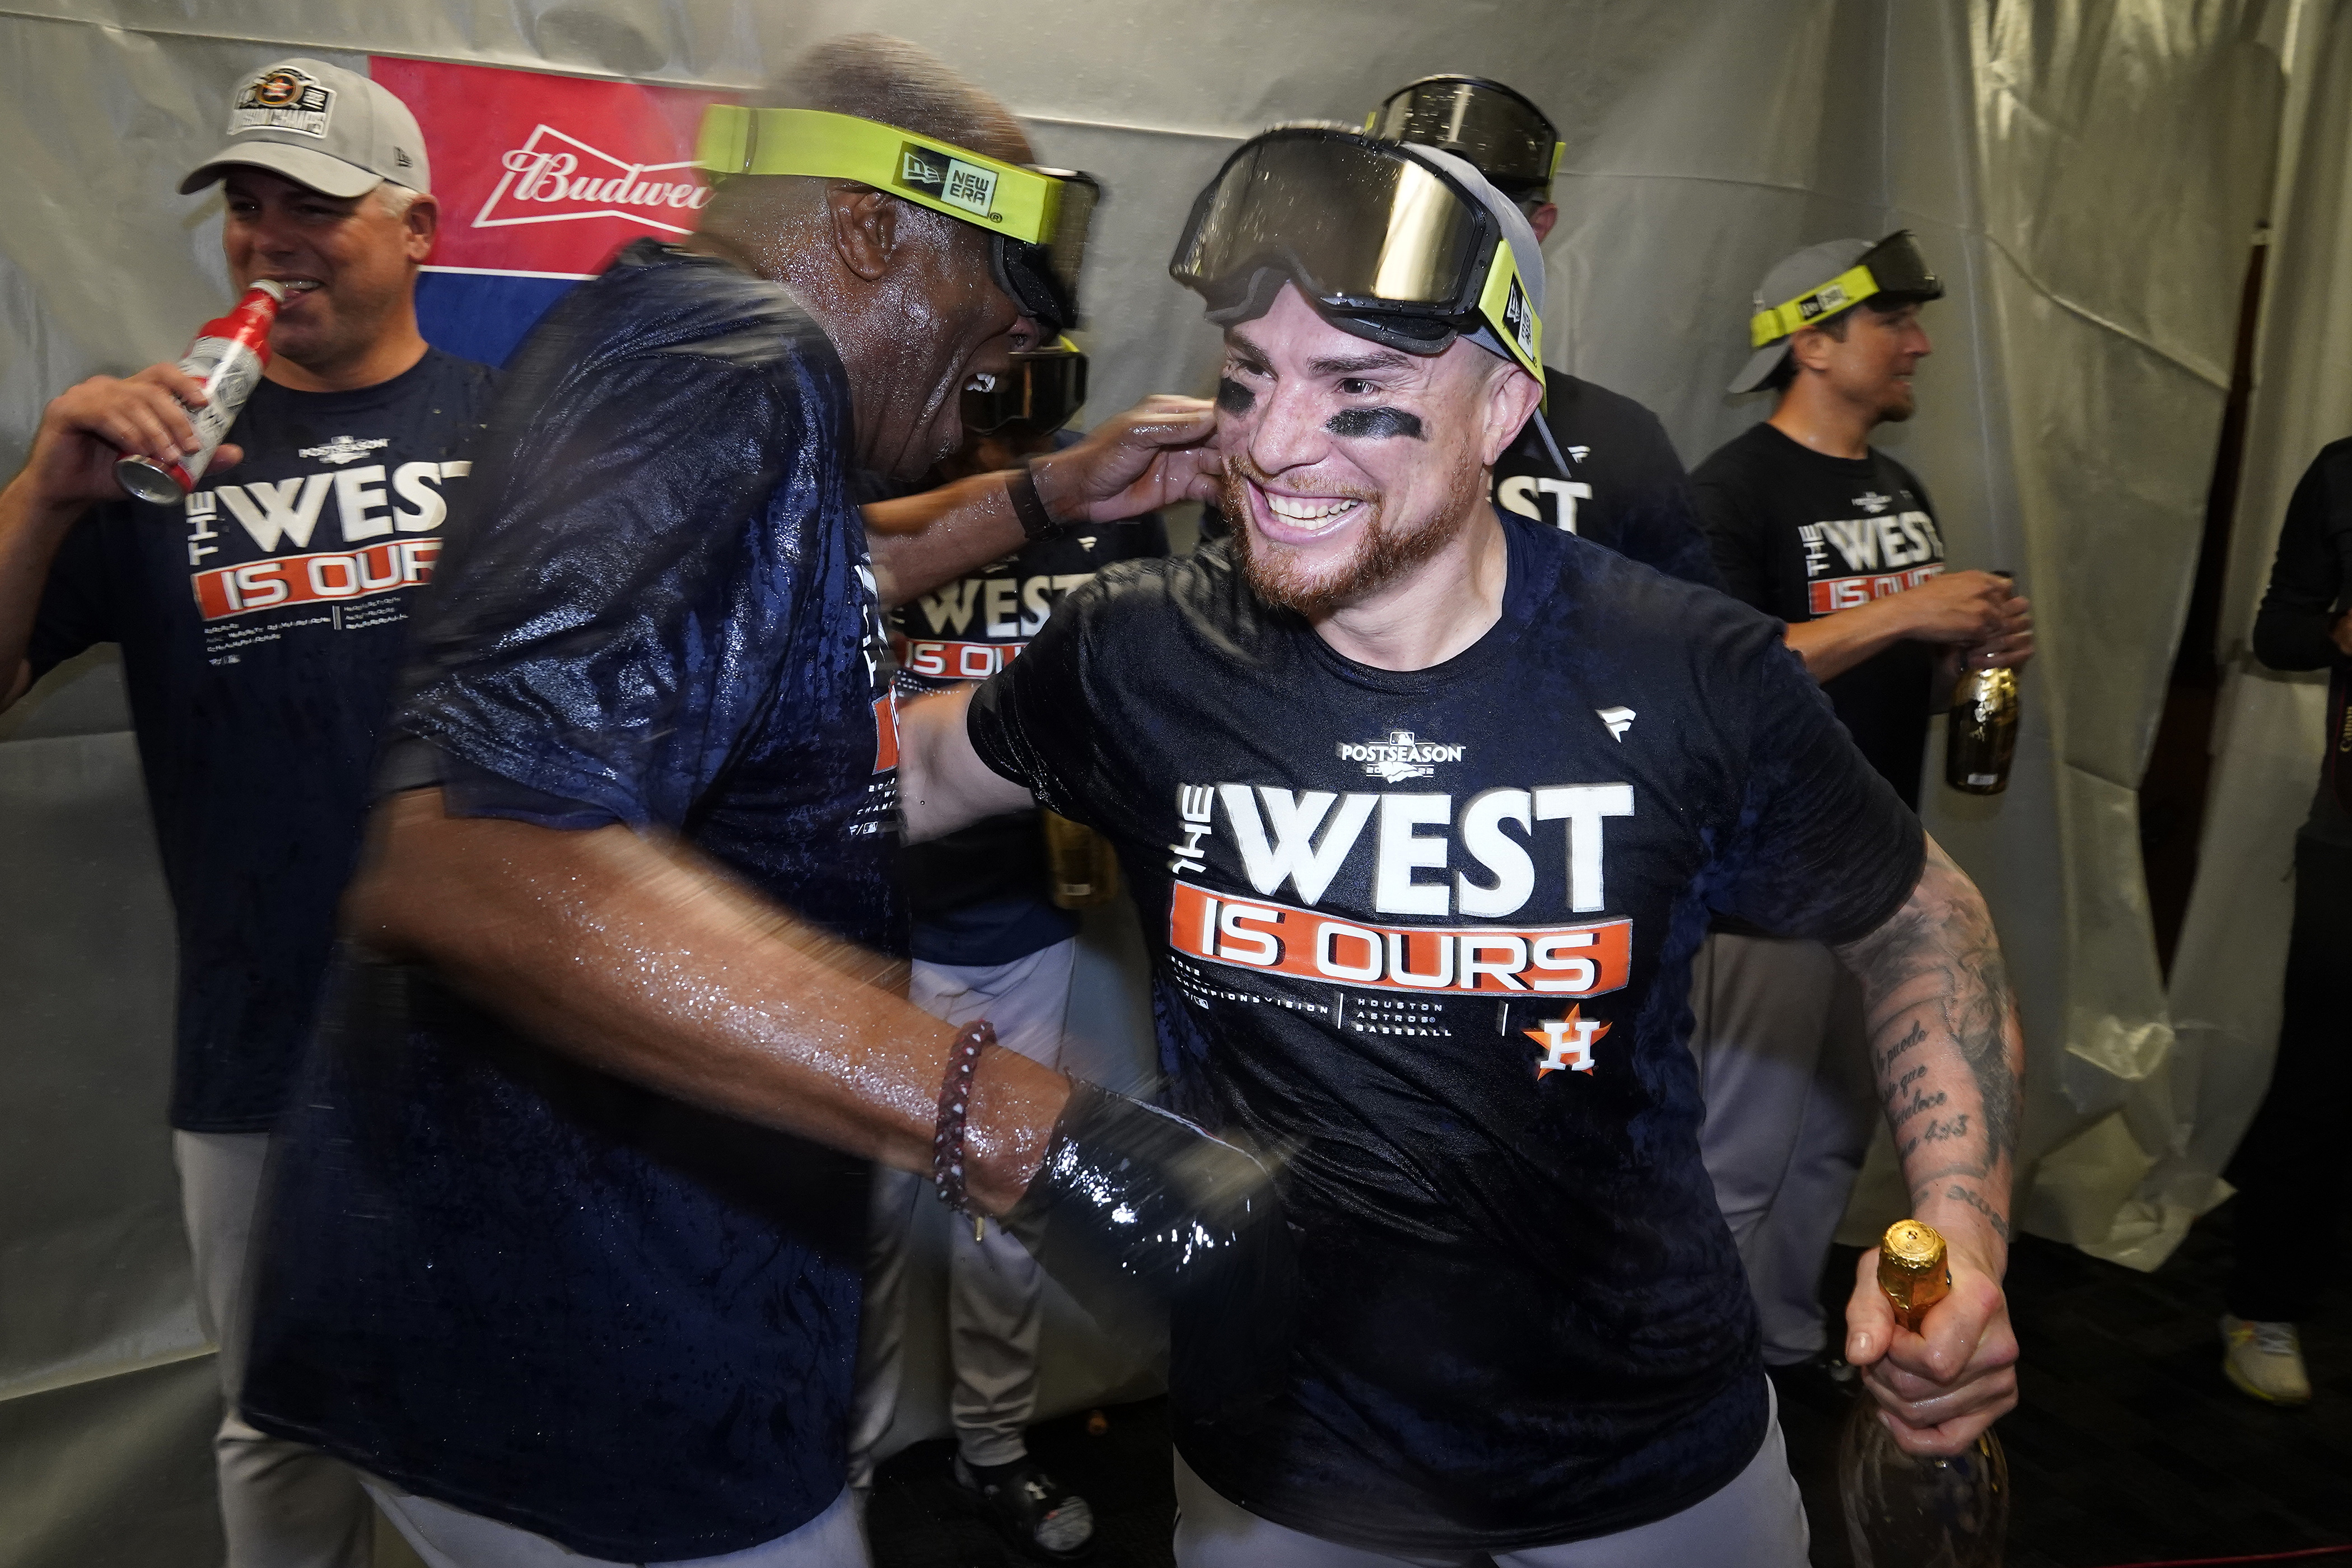 Congrats, Astros! The Stros have won the American League West for the 5th  time in 6 years